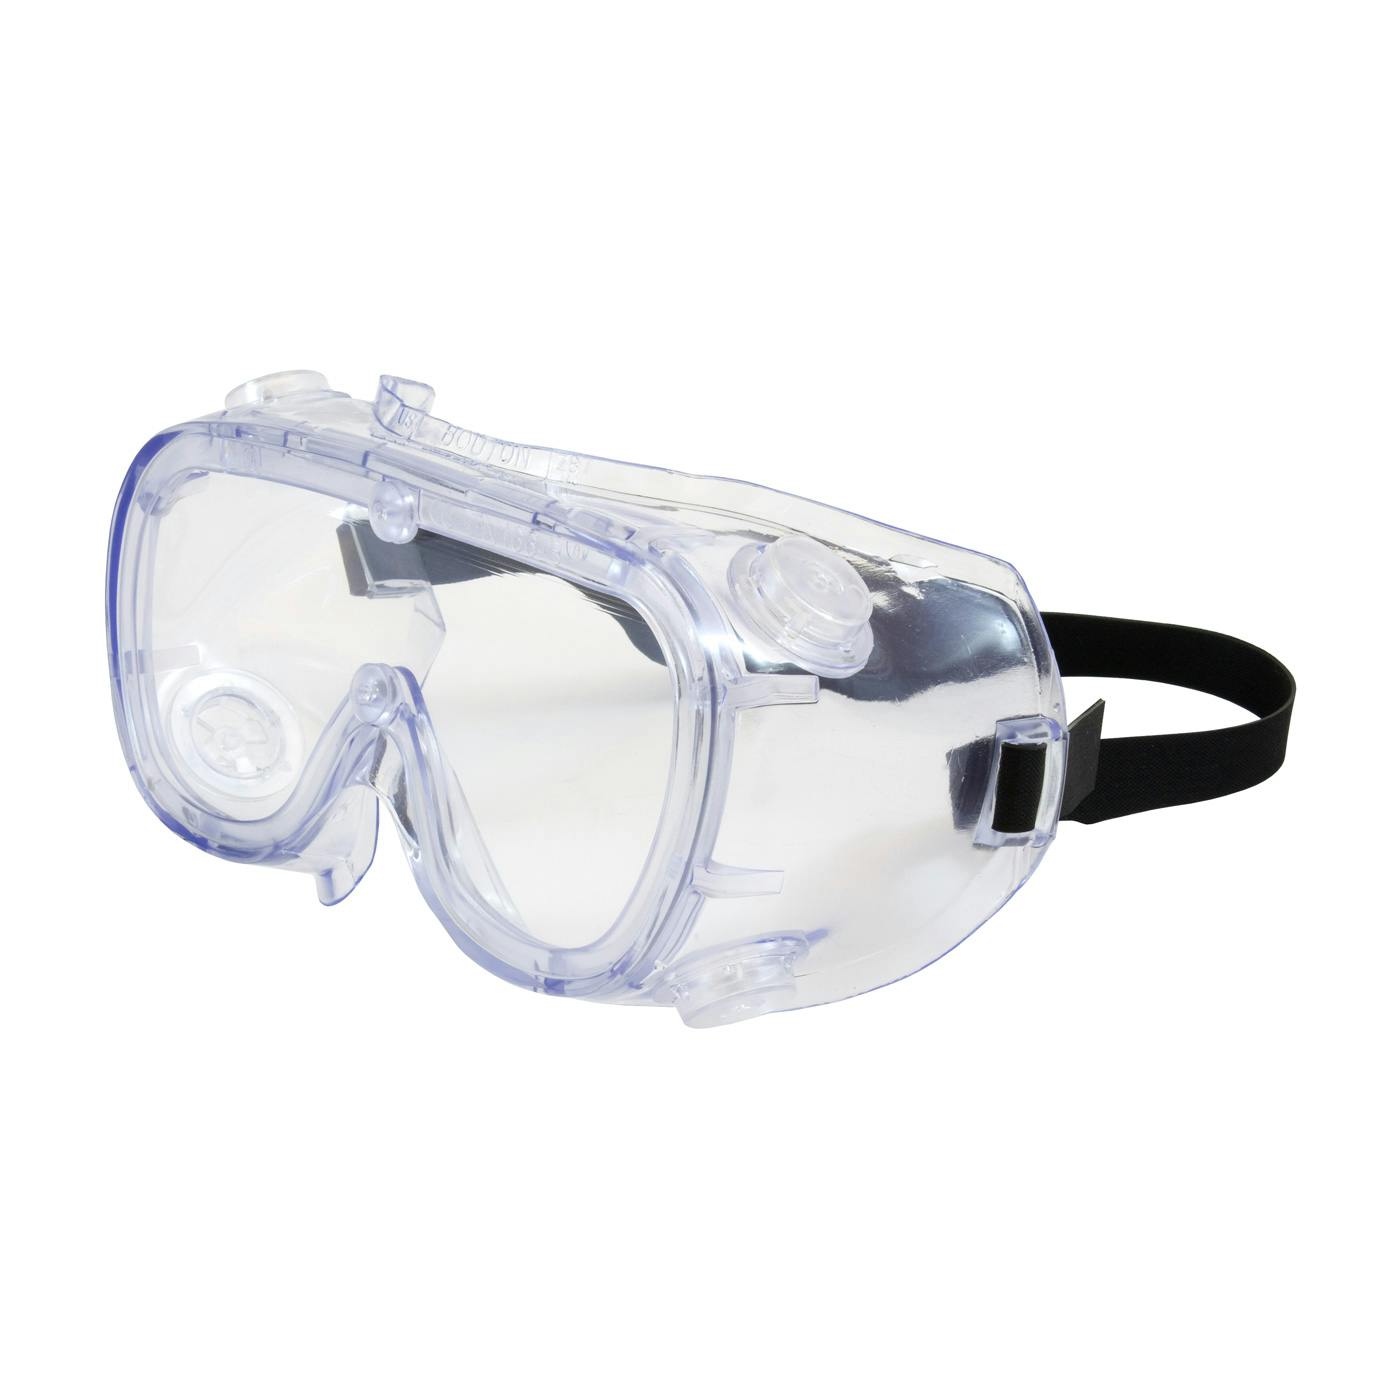 Indirect Vent Goggle with Clear Blue Body, Clear Lens and Anti-Scratch Coating, Clear (248-5190-300B) - OS_0